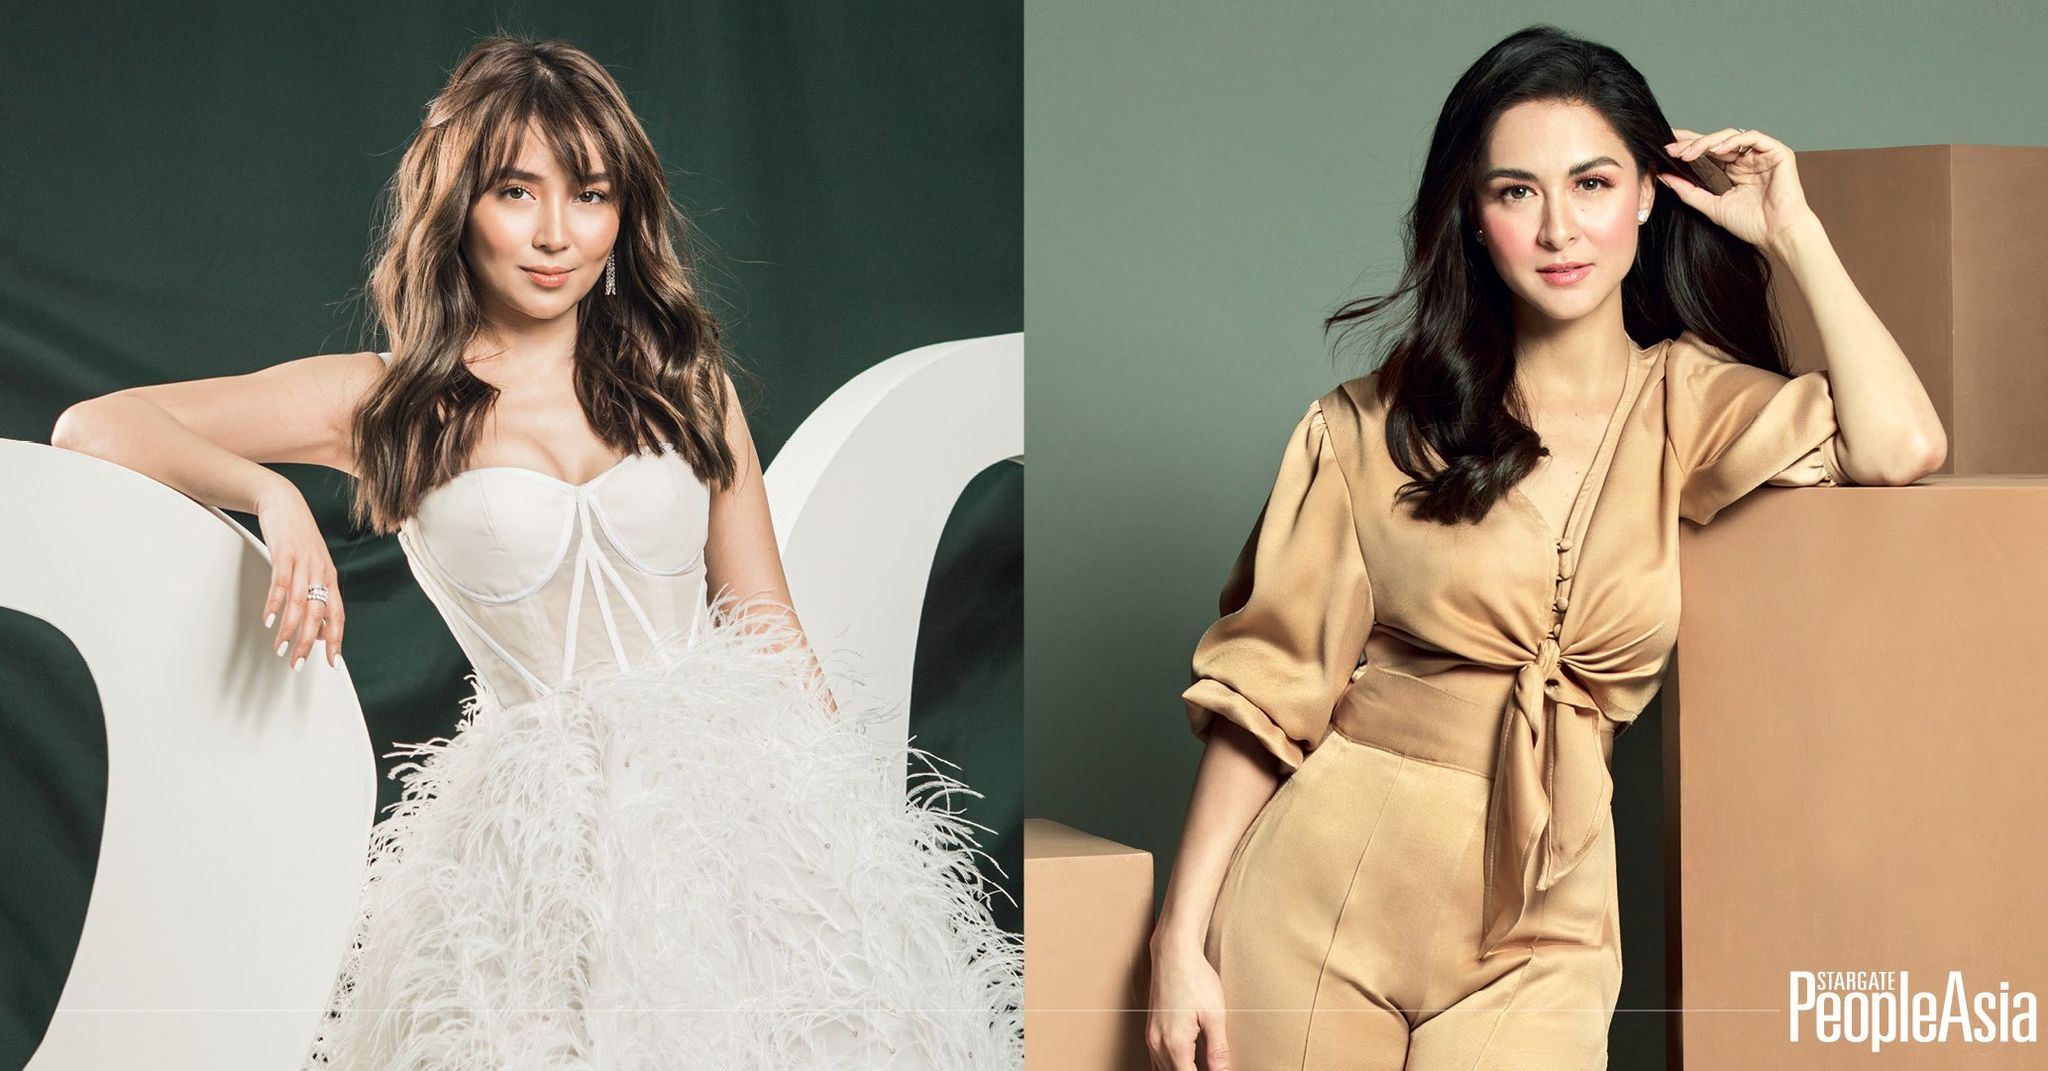 Marian and Kathryn join Forbes Asia’s elite list of “100 Digital Stars”